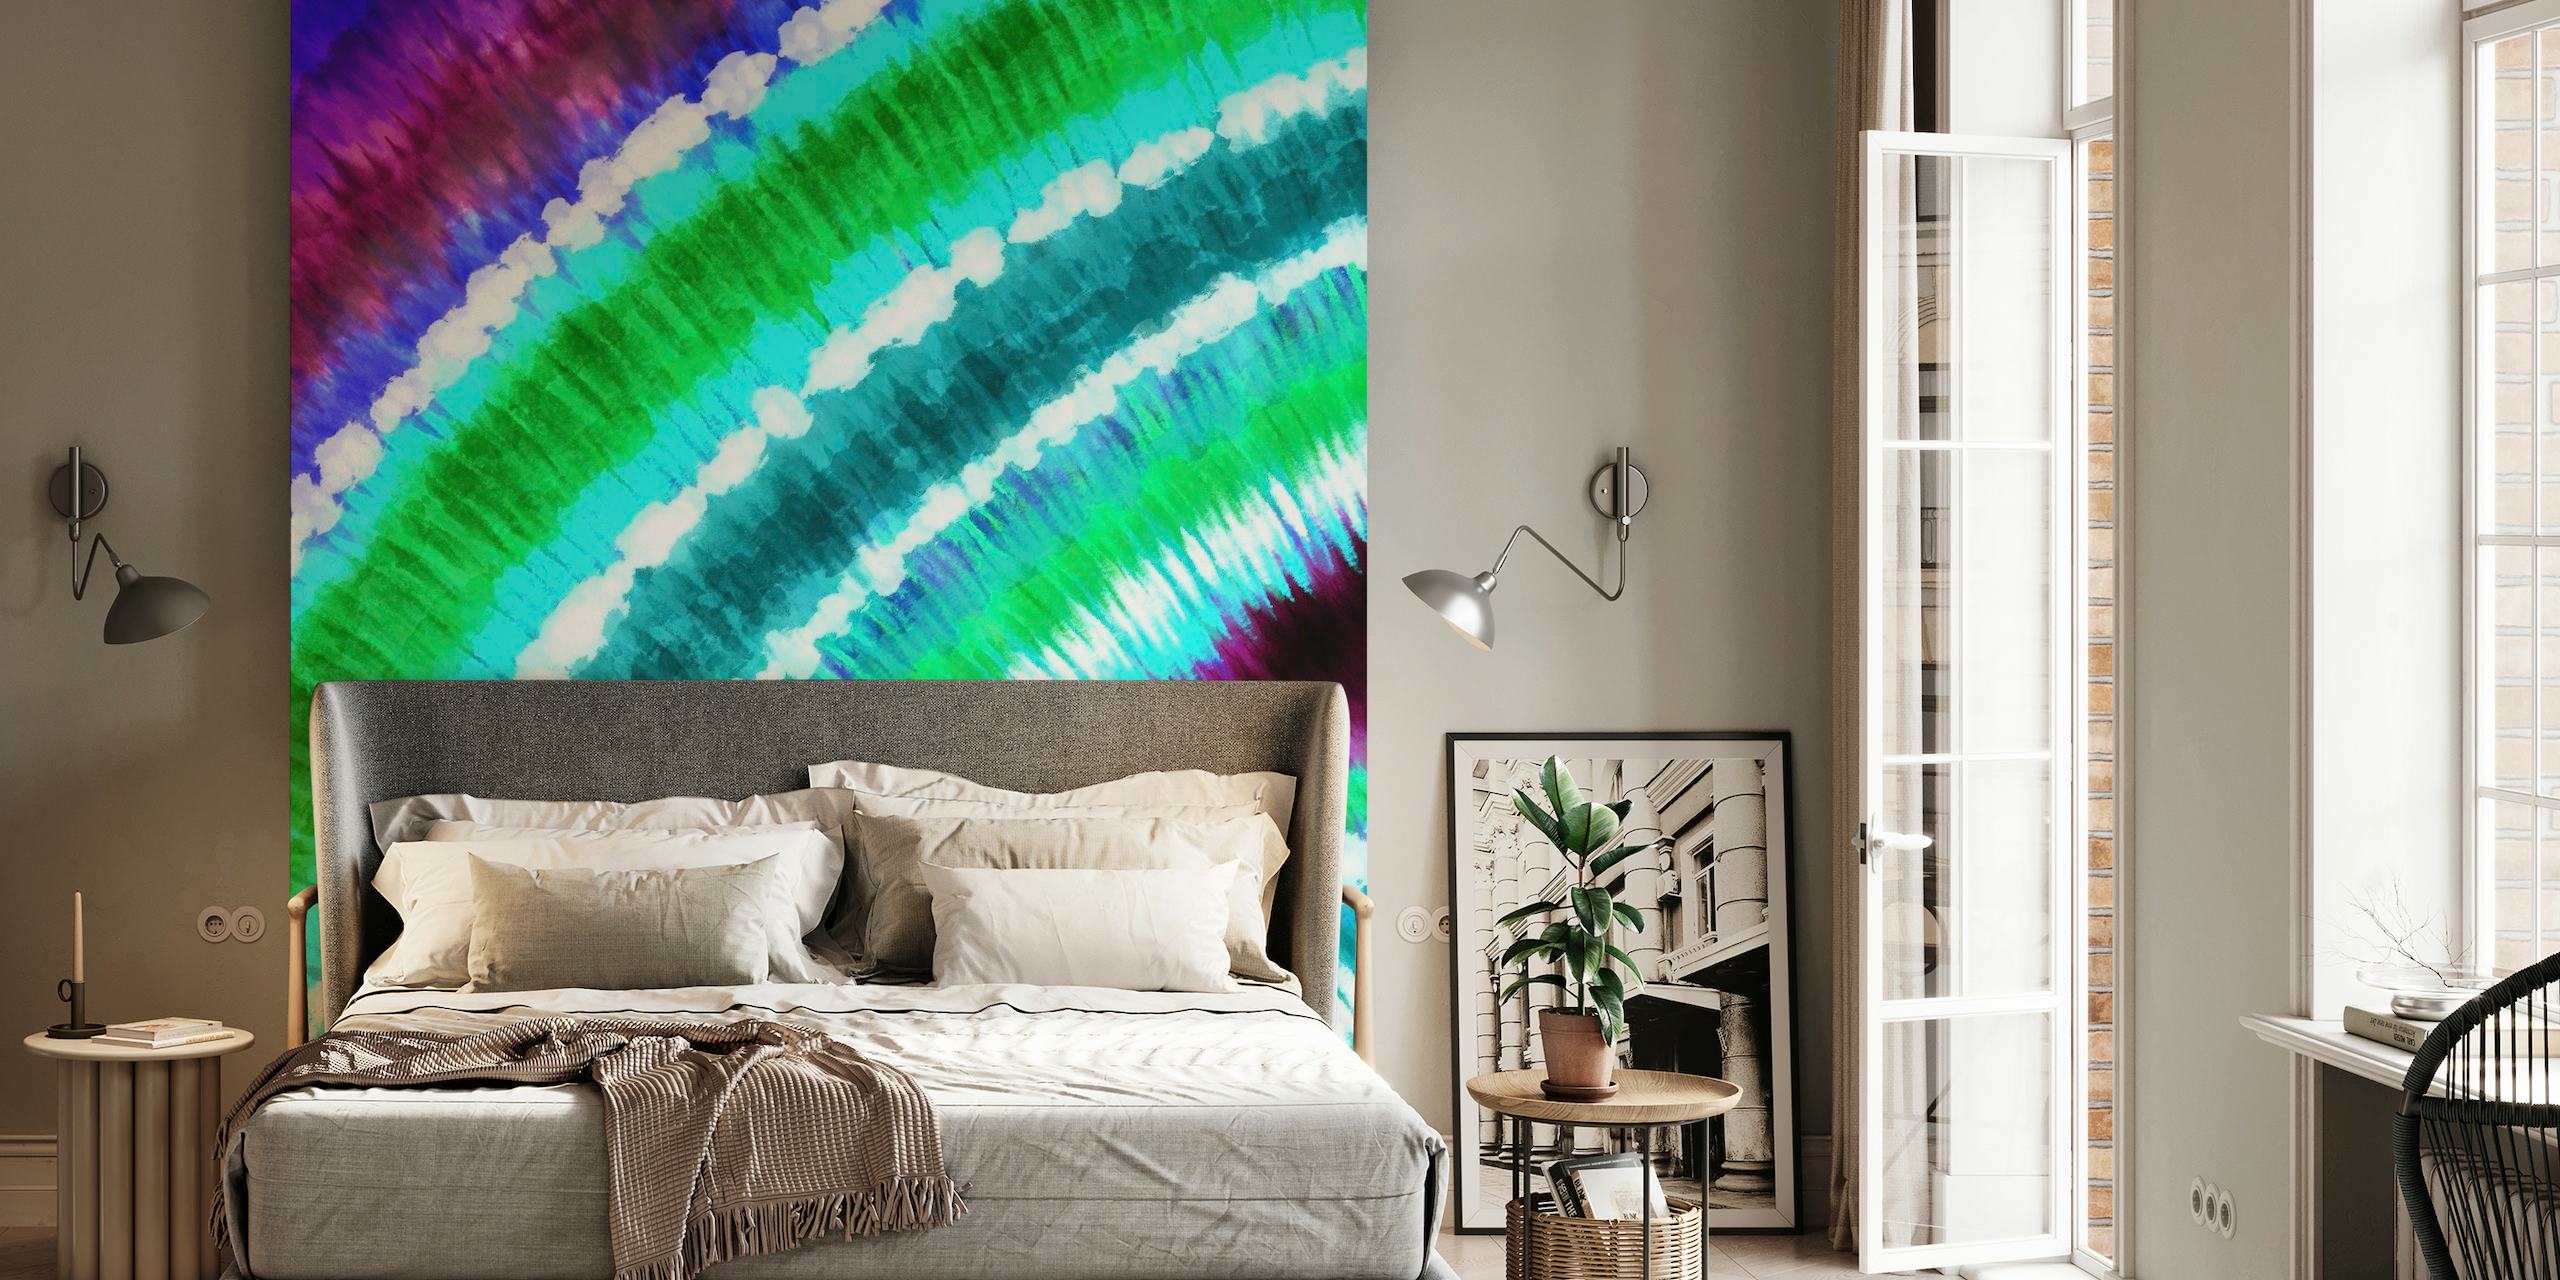 Colorful tie-dye wall mural with swirls of blue, purple, and green